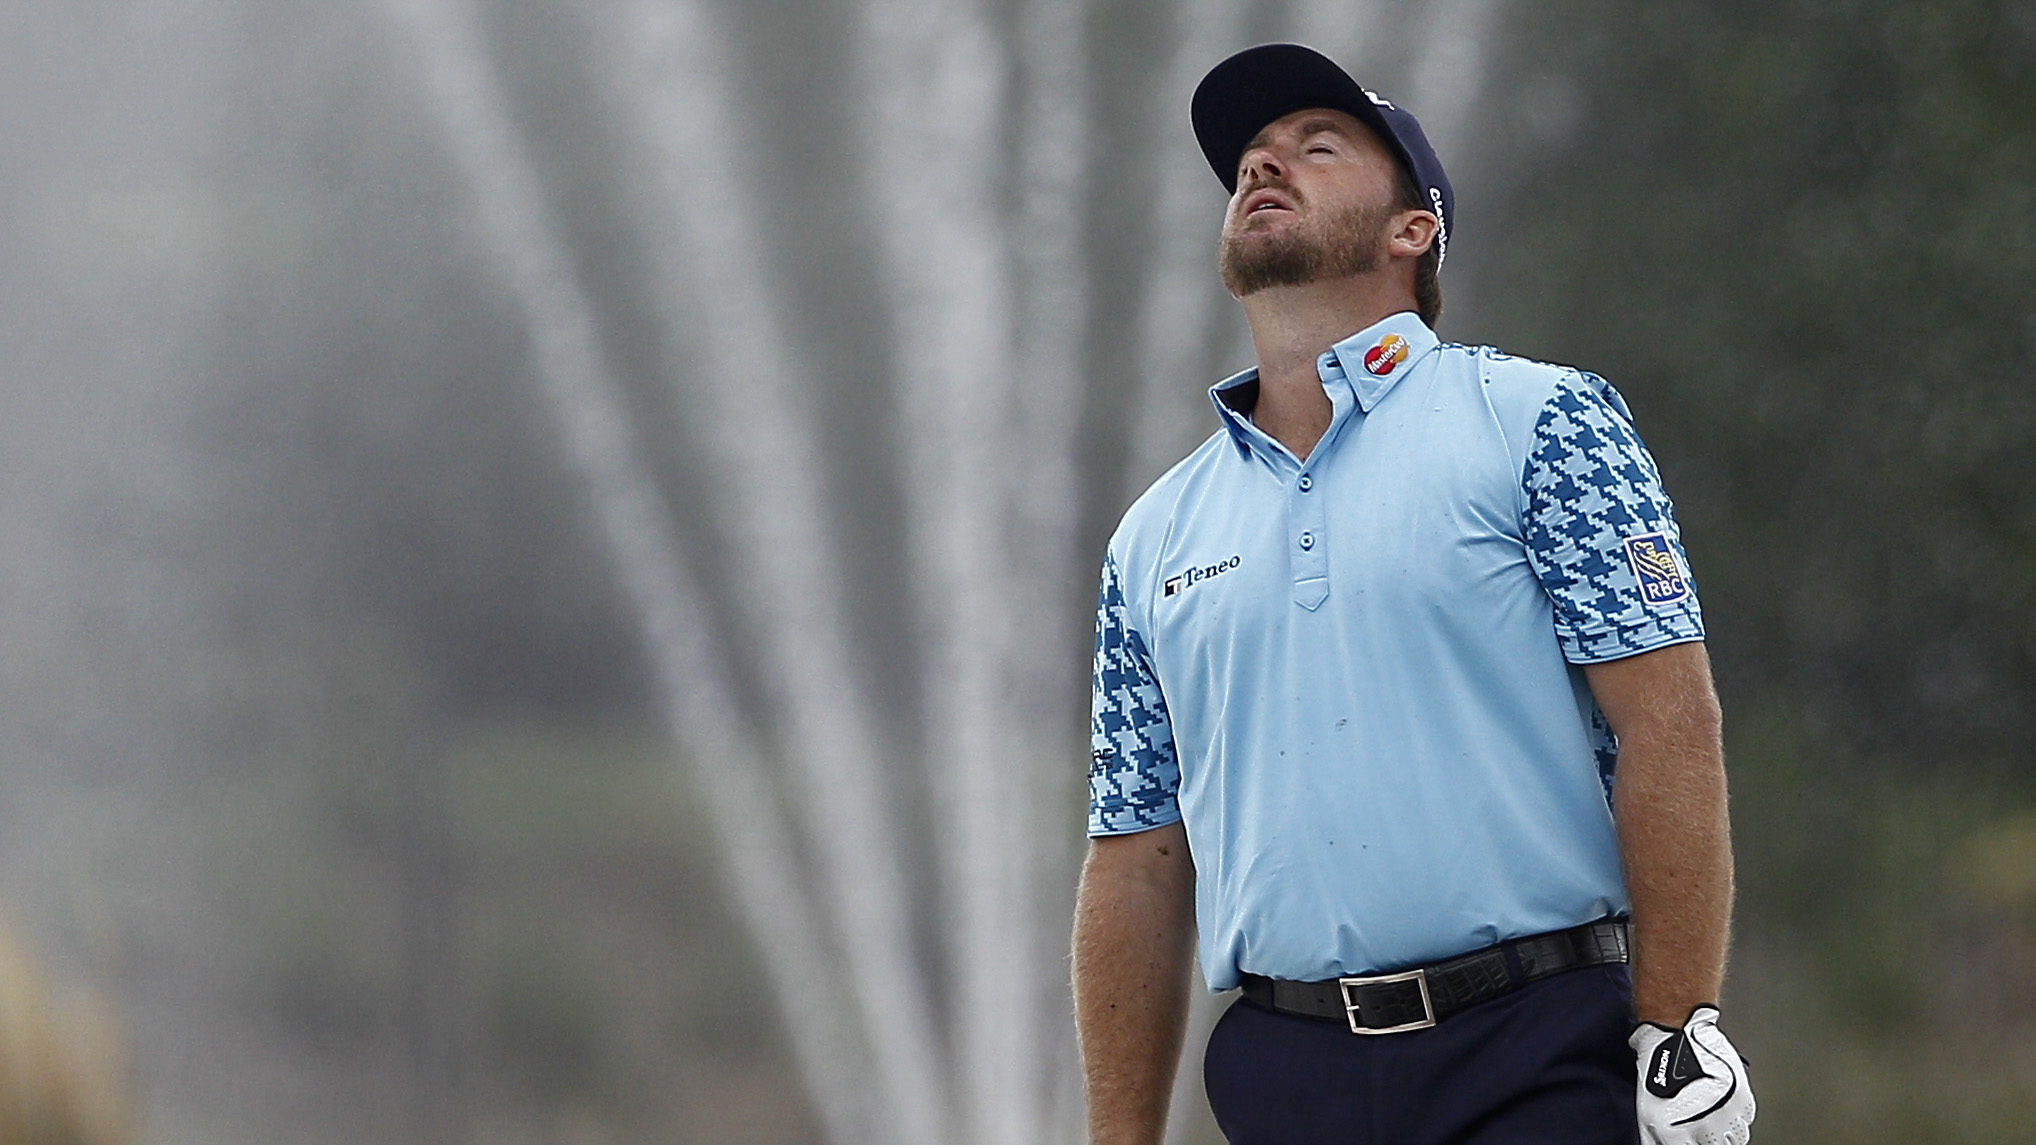 Update: Graeme McDowell's missing clubs found by Air France and returned